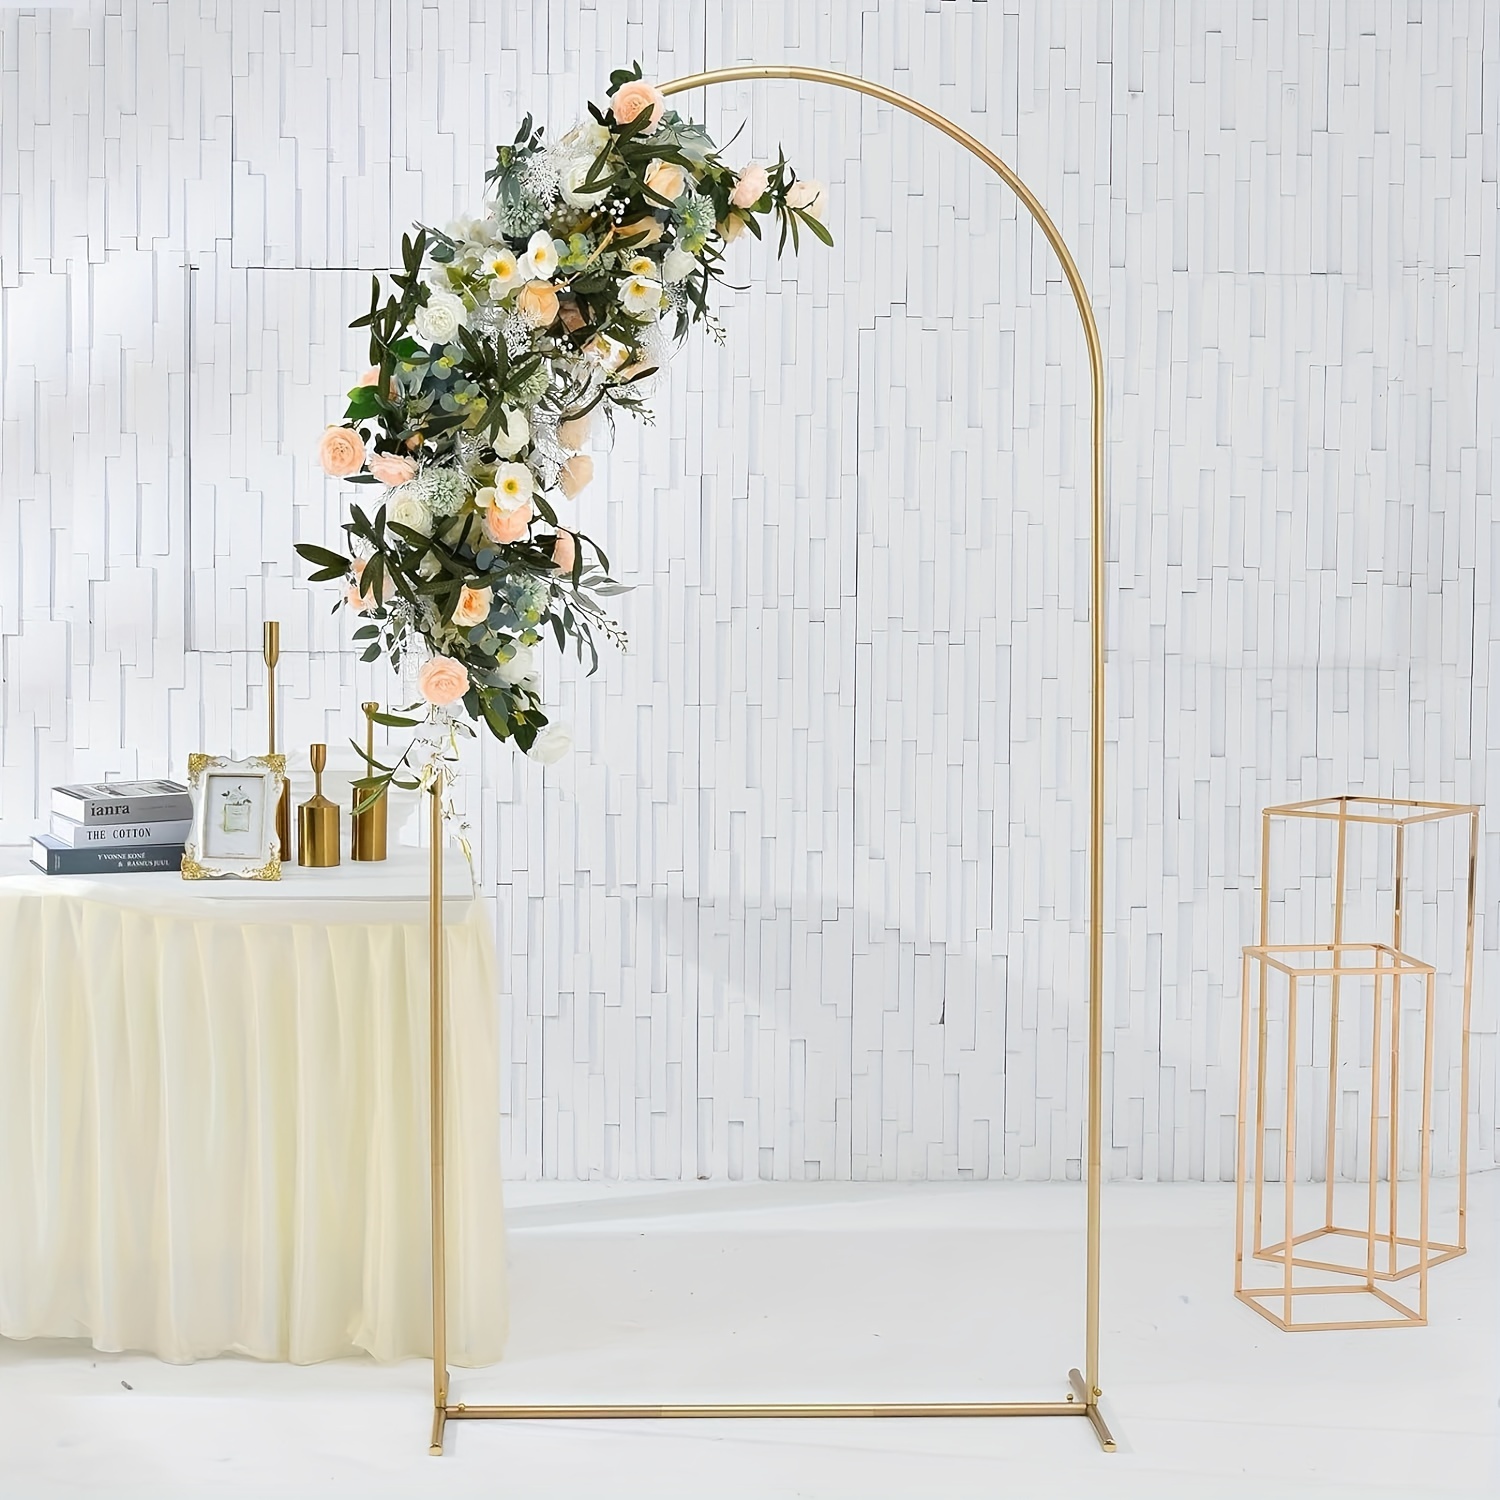 

Metal Arch Backdrop Stand Gold Wedding Balloon Arched Backdrop Stand Square Arch Frame For Birthday Party Bridal Baby Shower Ceremony Decoration, 6.6ft